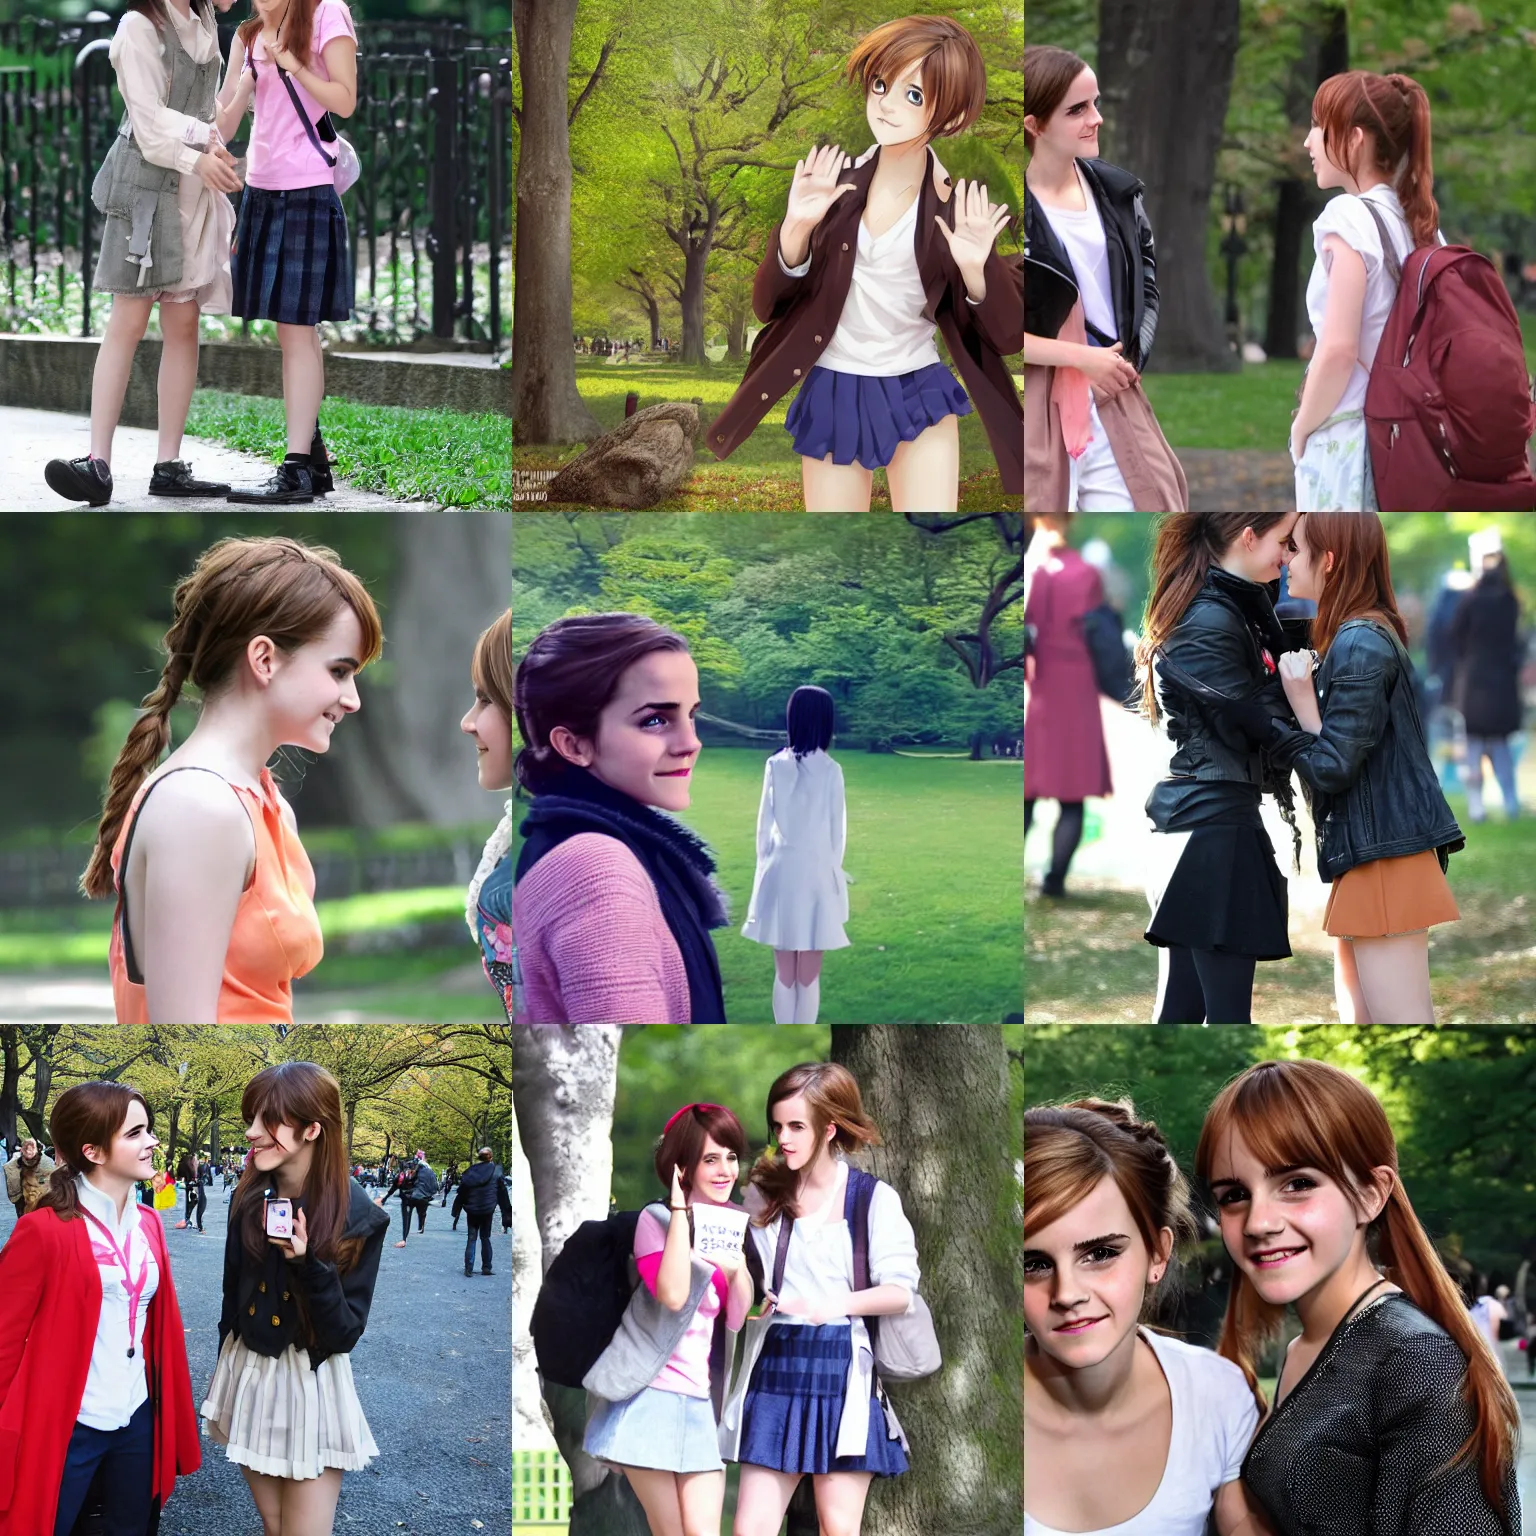 Prompt: photorealistic Emma Watson meets a cute smiling anime girl in Central Park